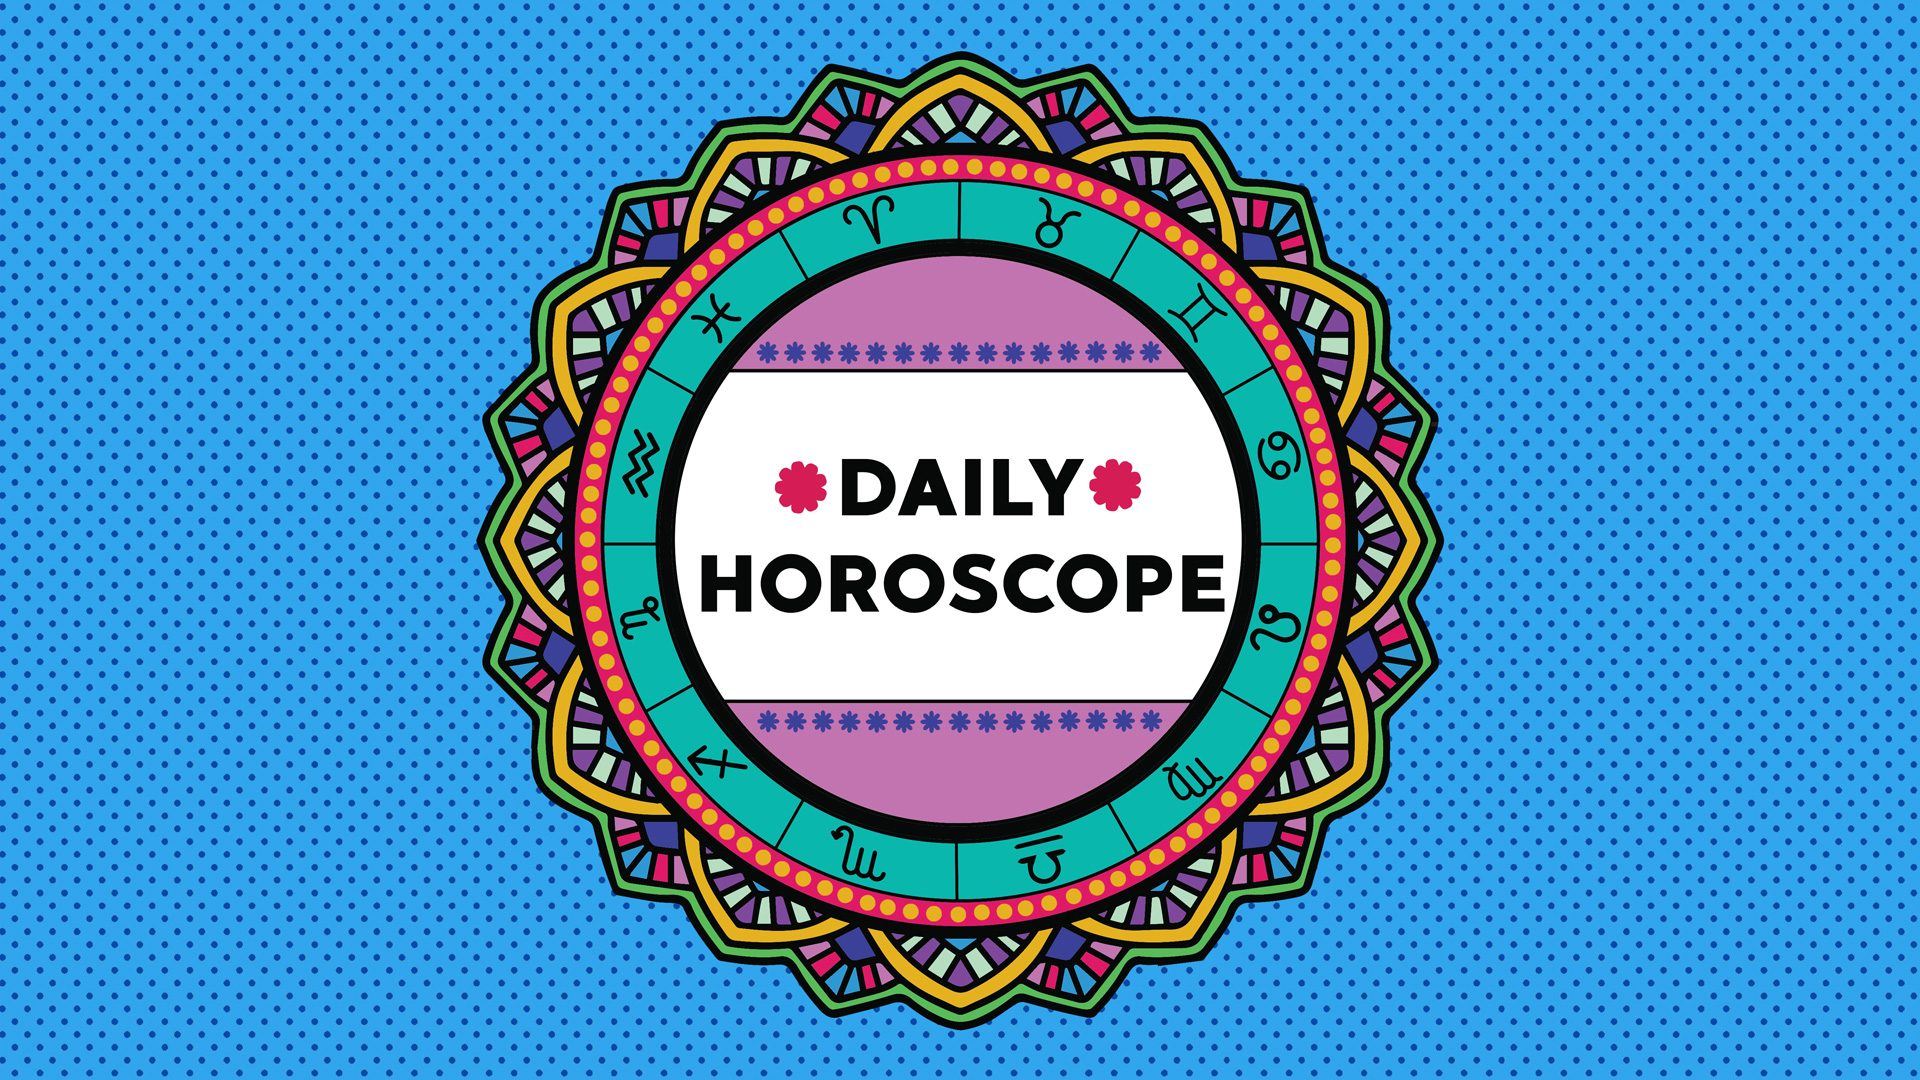 Daily Horoscope (Today - April 9): Predictions For Love, Health, Financial and Career With 12 Zodiac Signs